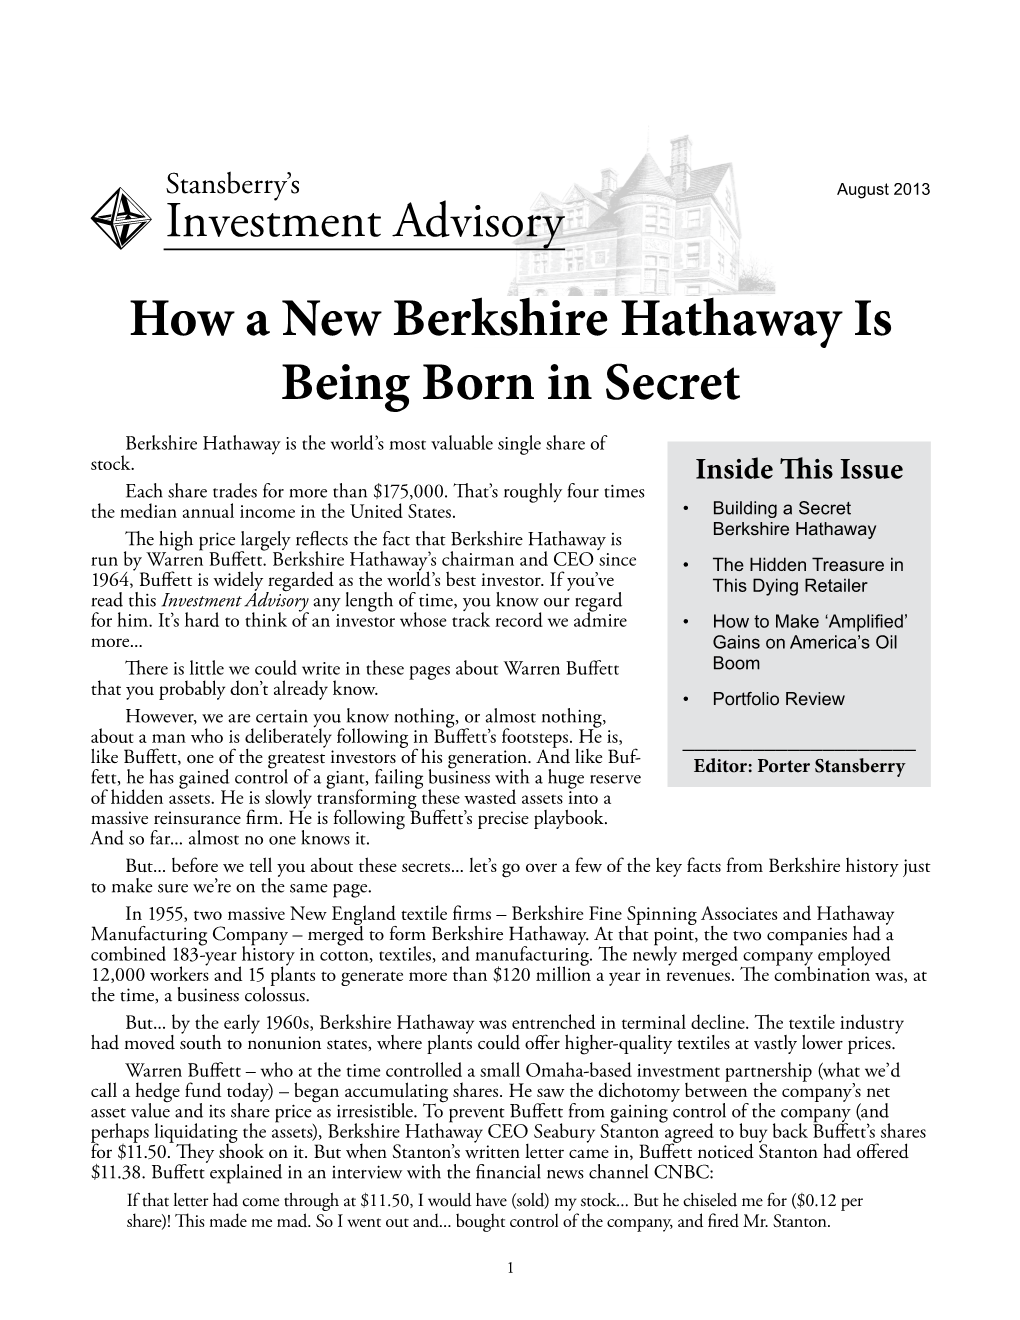 How a New Berkshire Hathaway Is Being Born in Secret Berkshire Hathaway Is the World’S Most Valuable Single Share of Stock